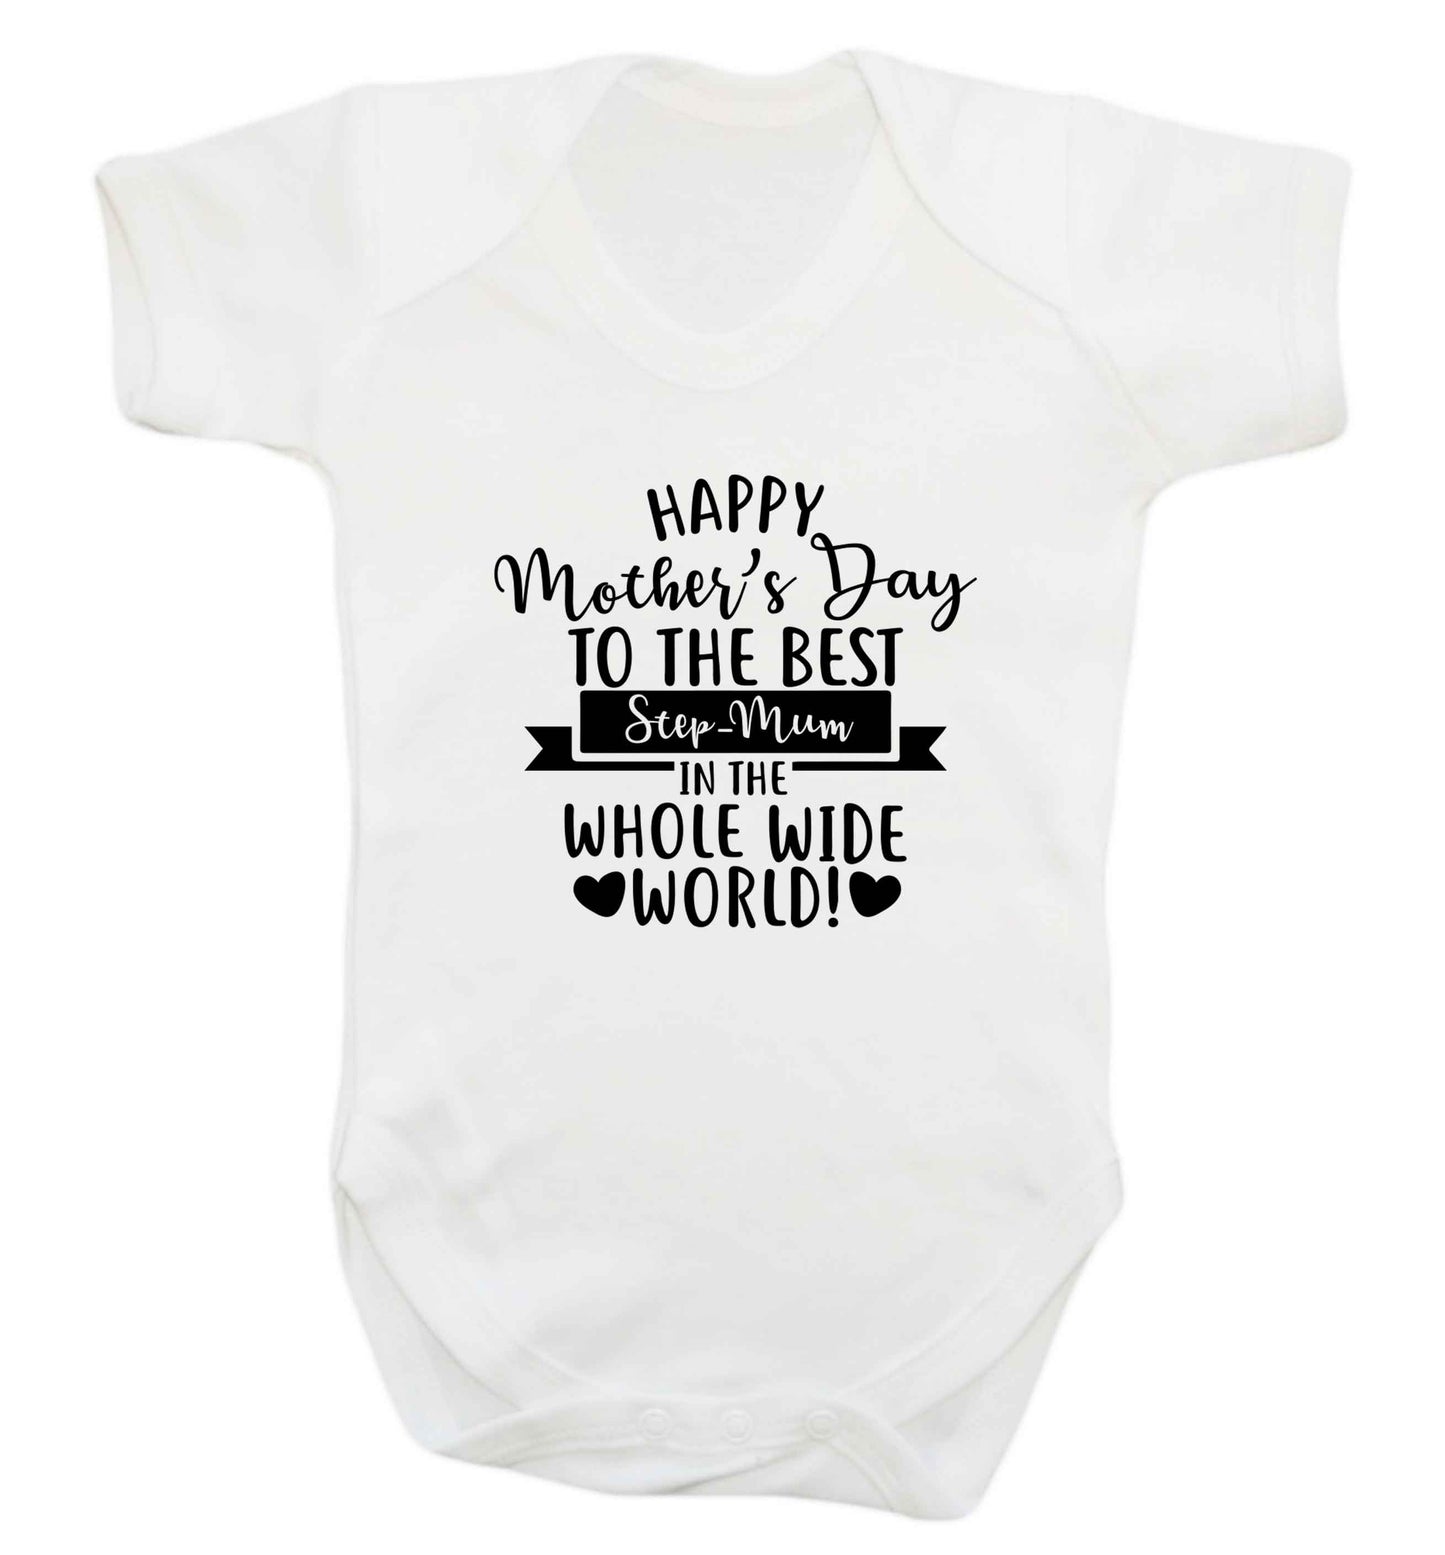 Happy mother's day to the best step-mum in the world baby vest white 18-24 months